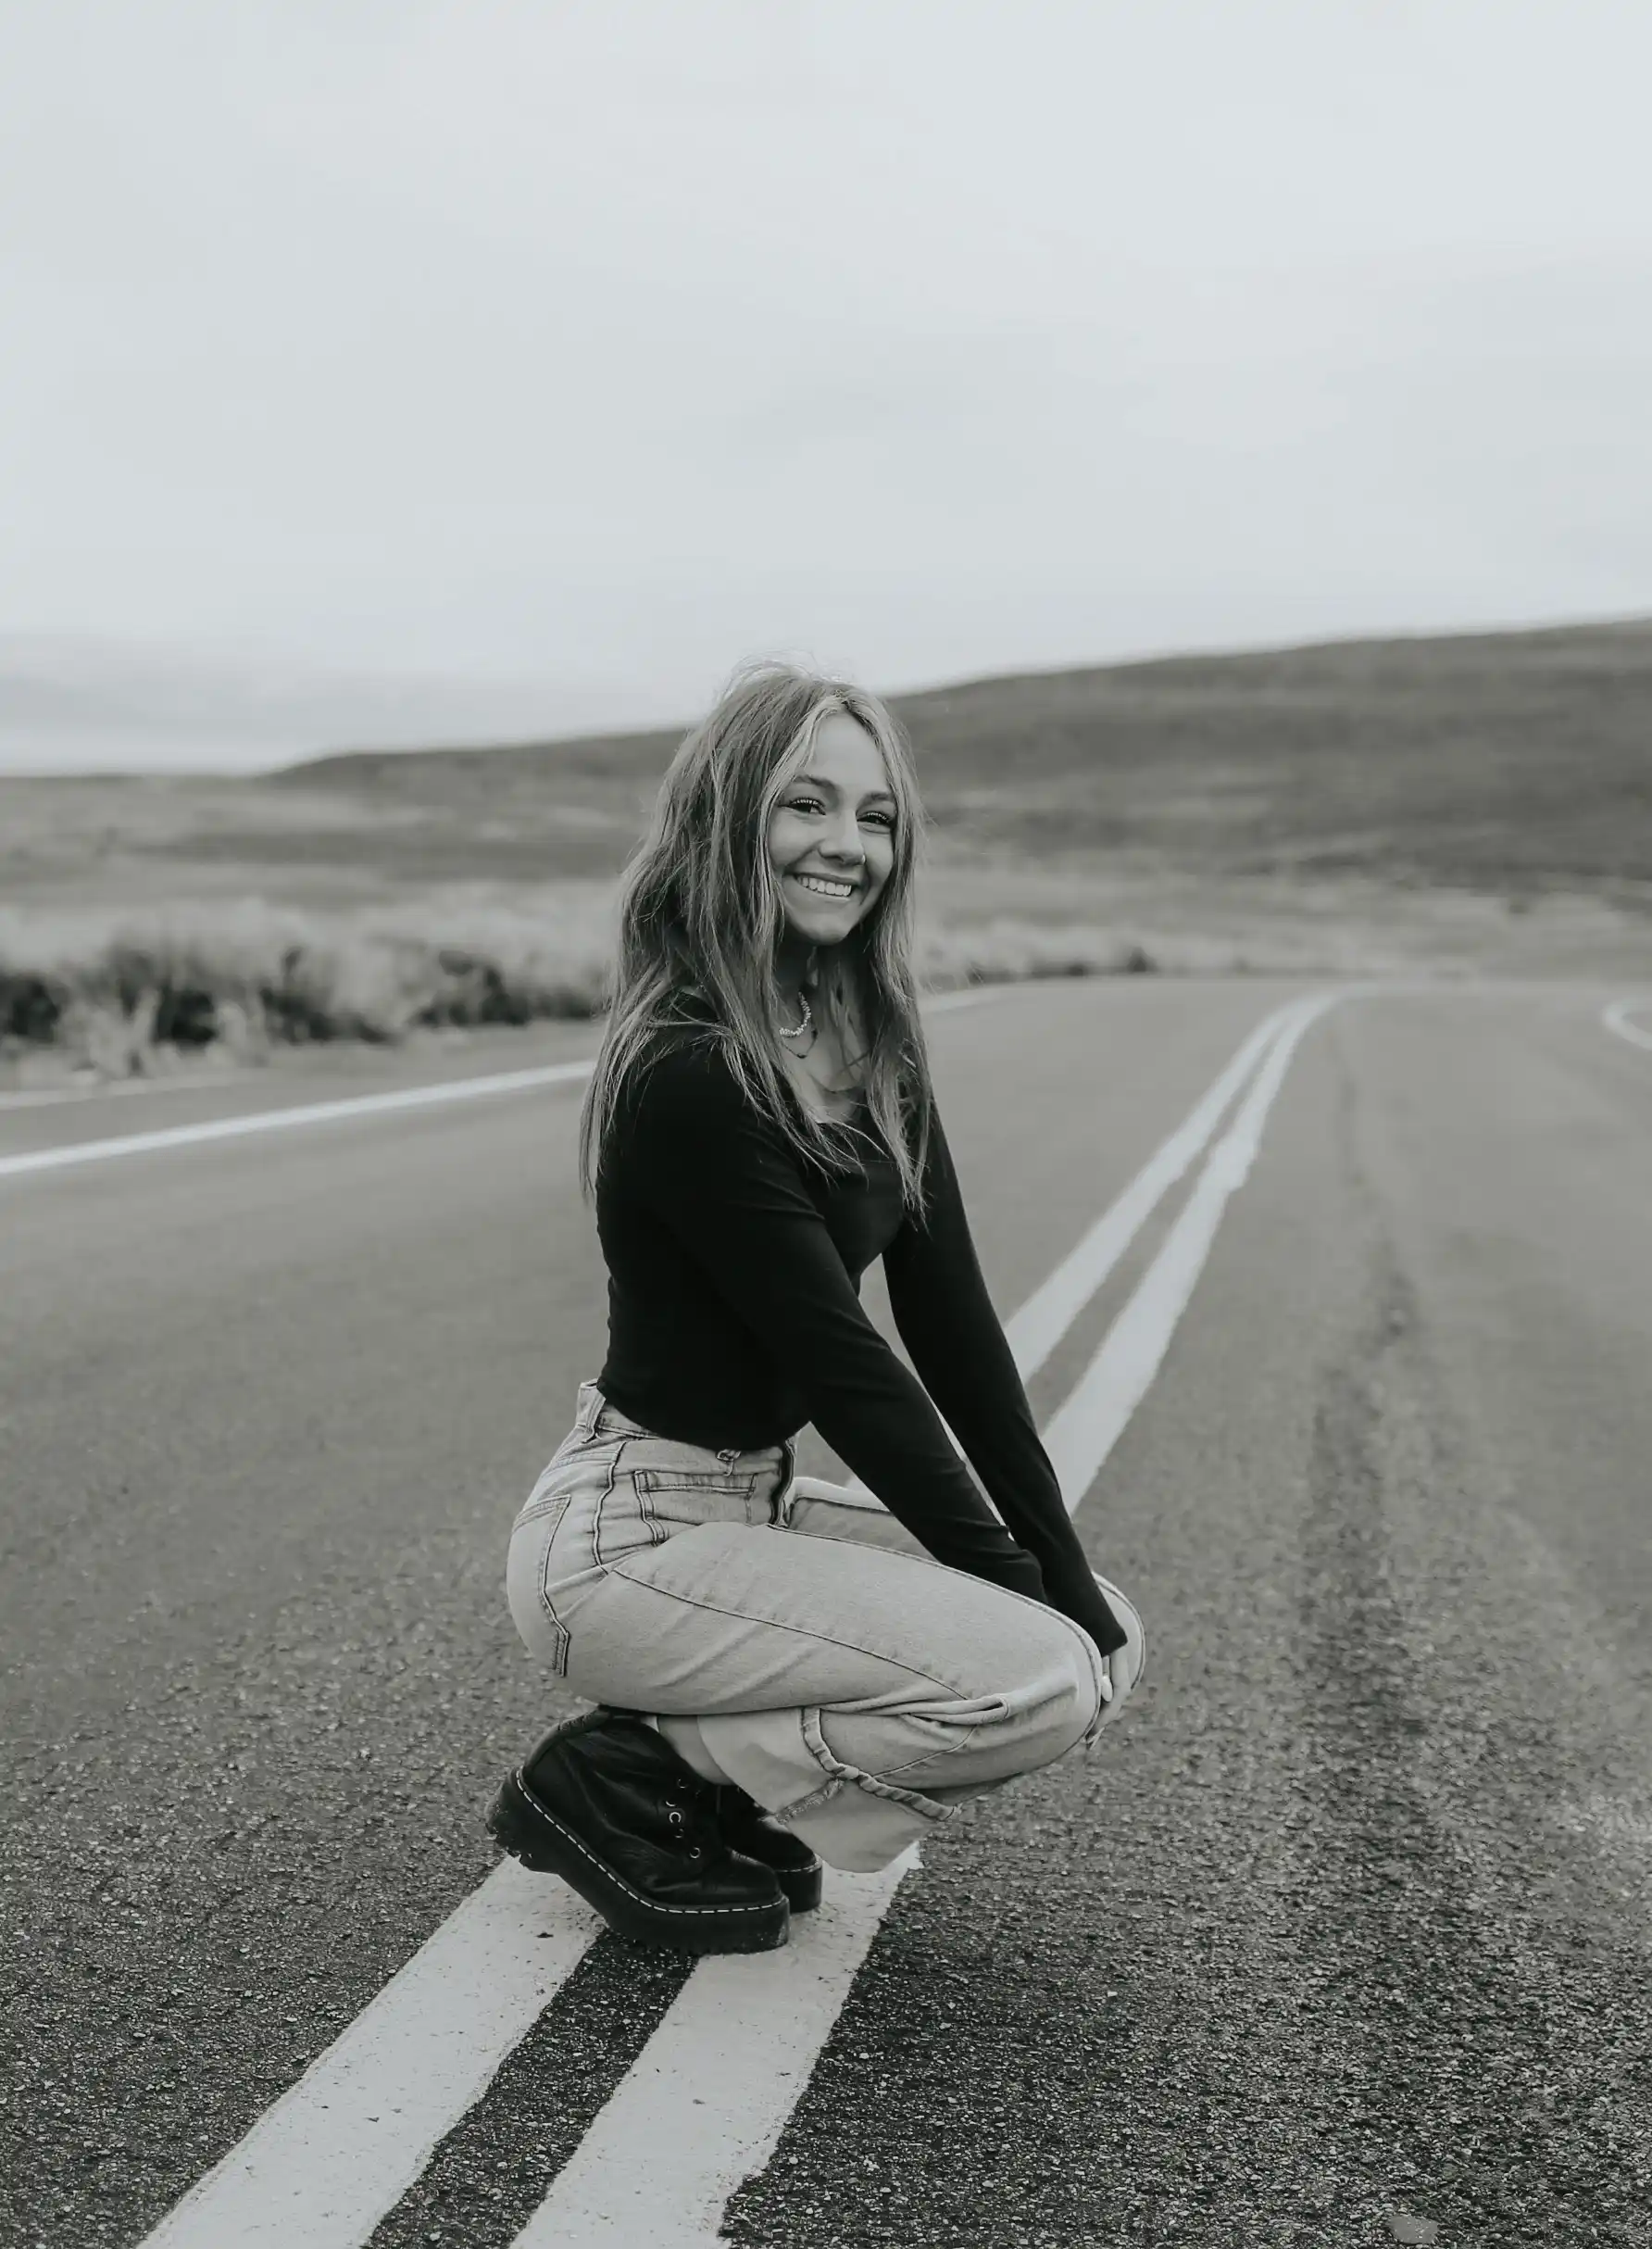 Girl squating and smiling in the road